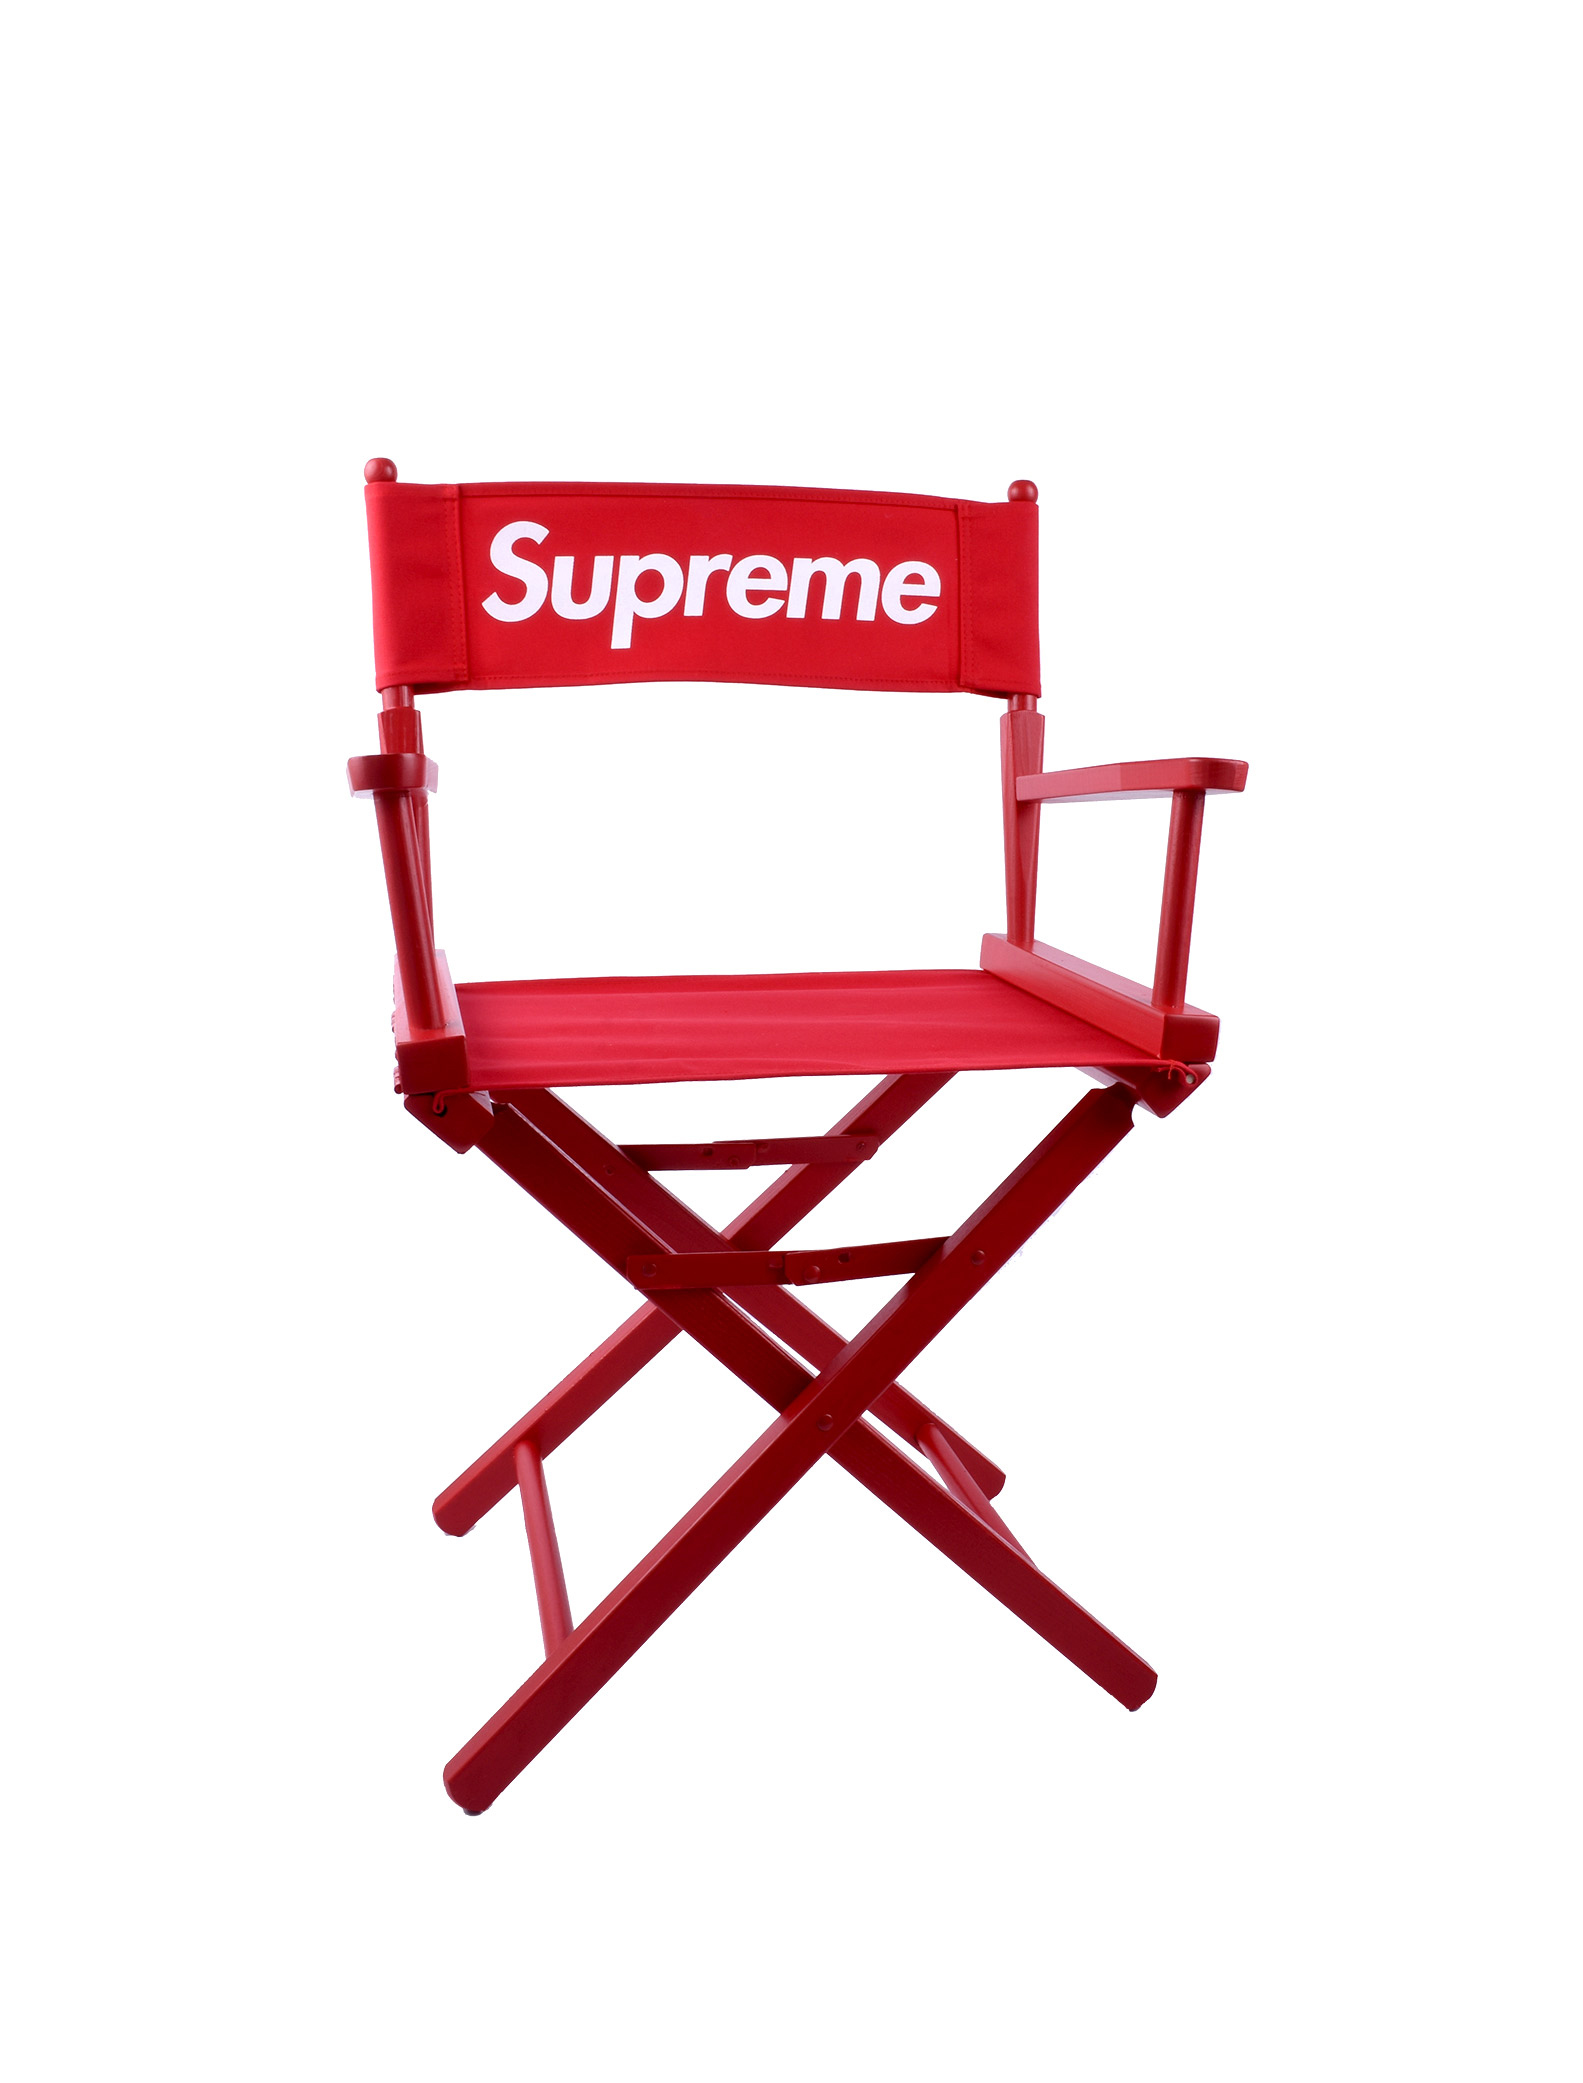 supreme Director's Chair 赤 椅子 | kensysgas.com